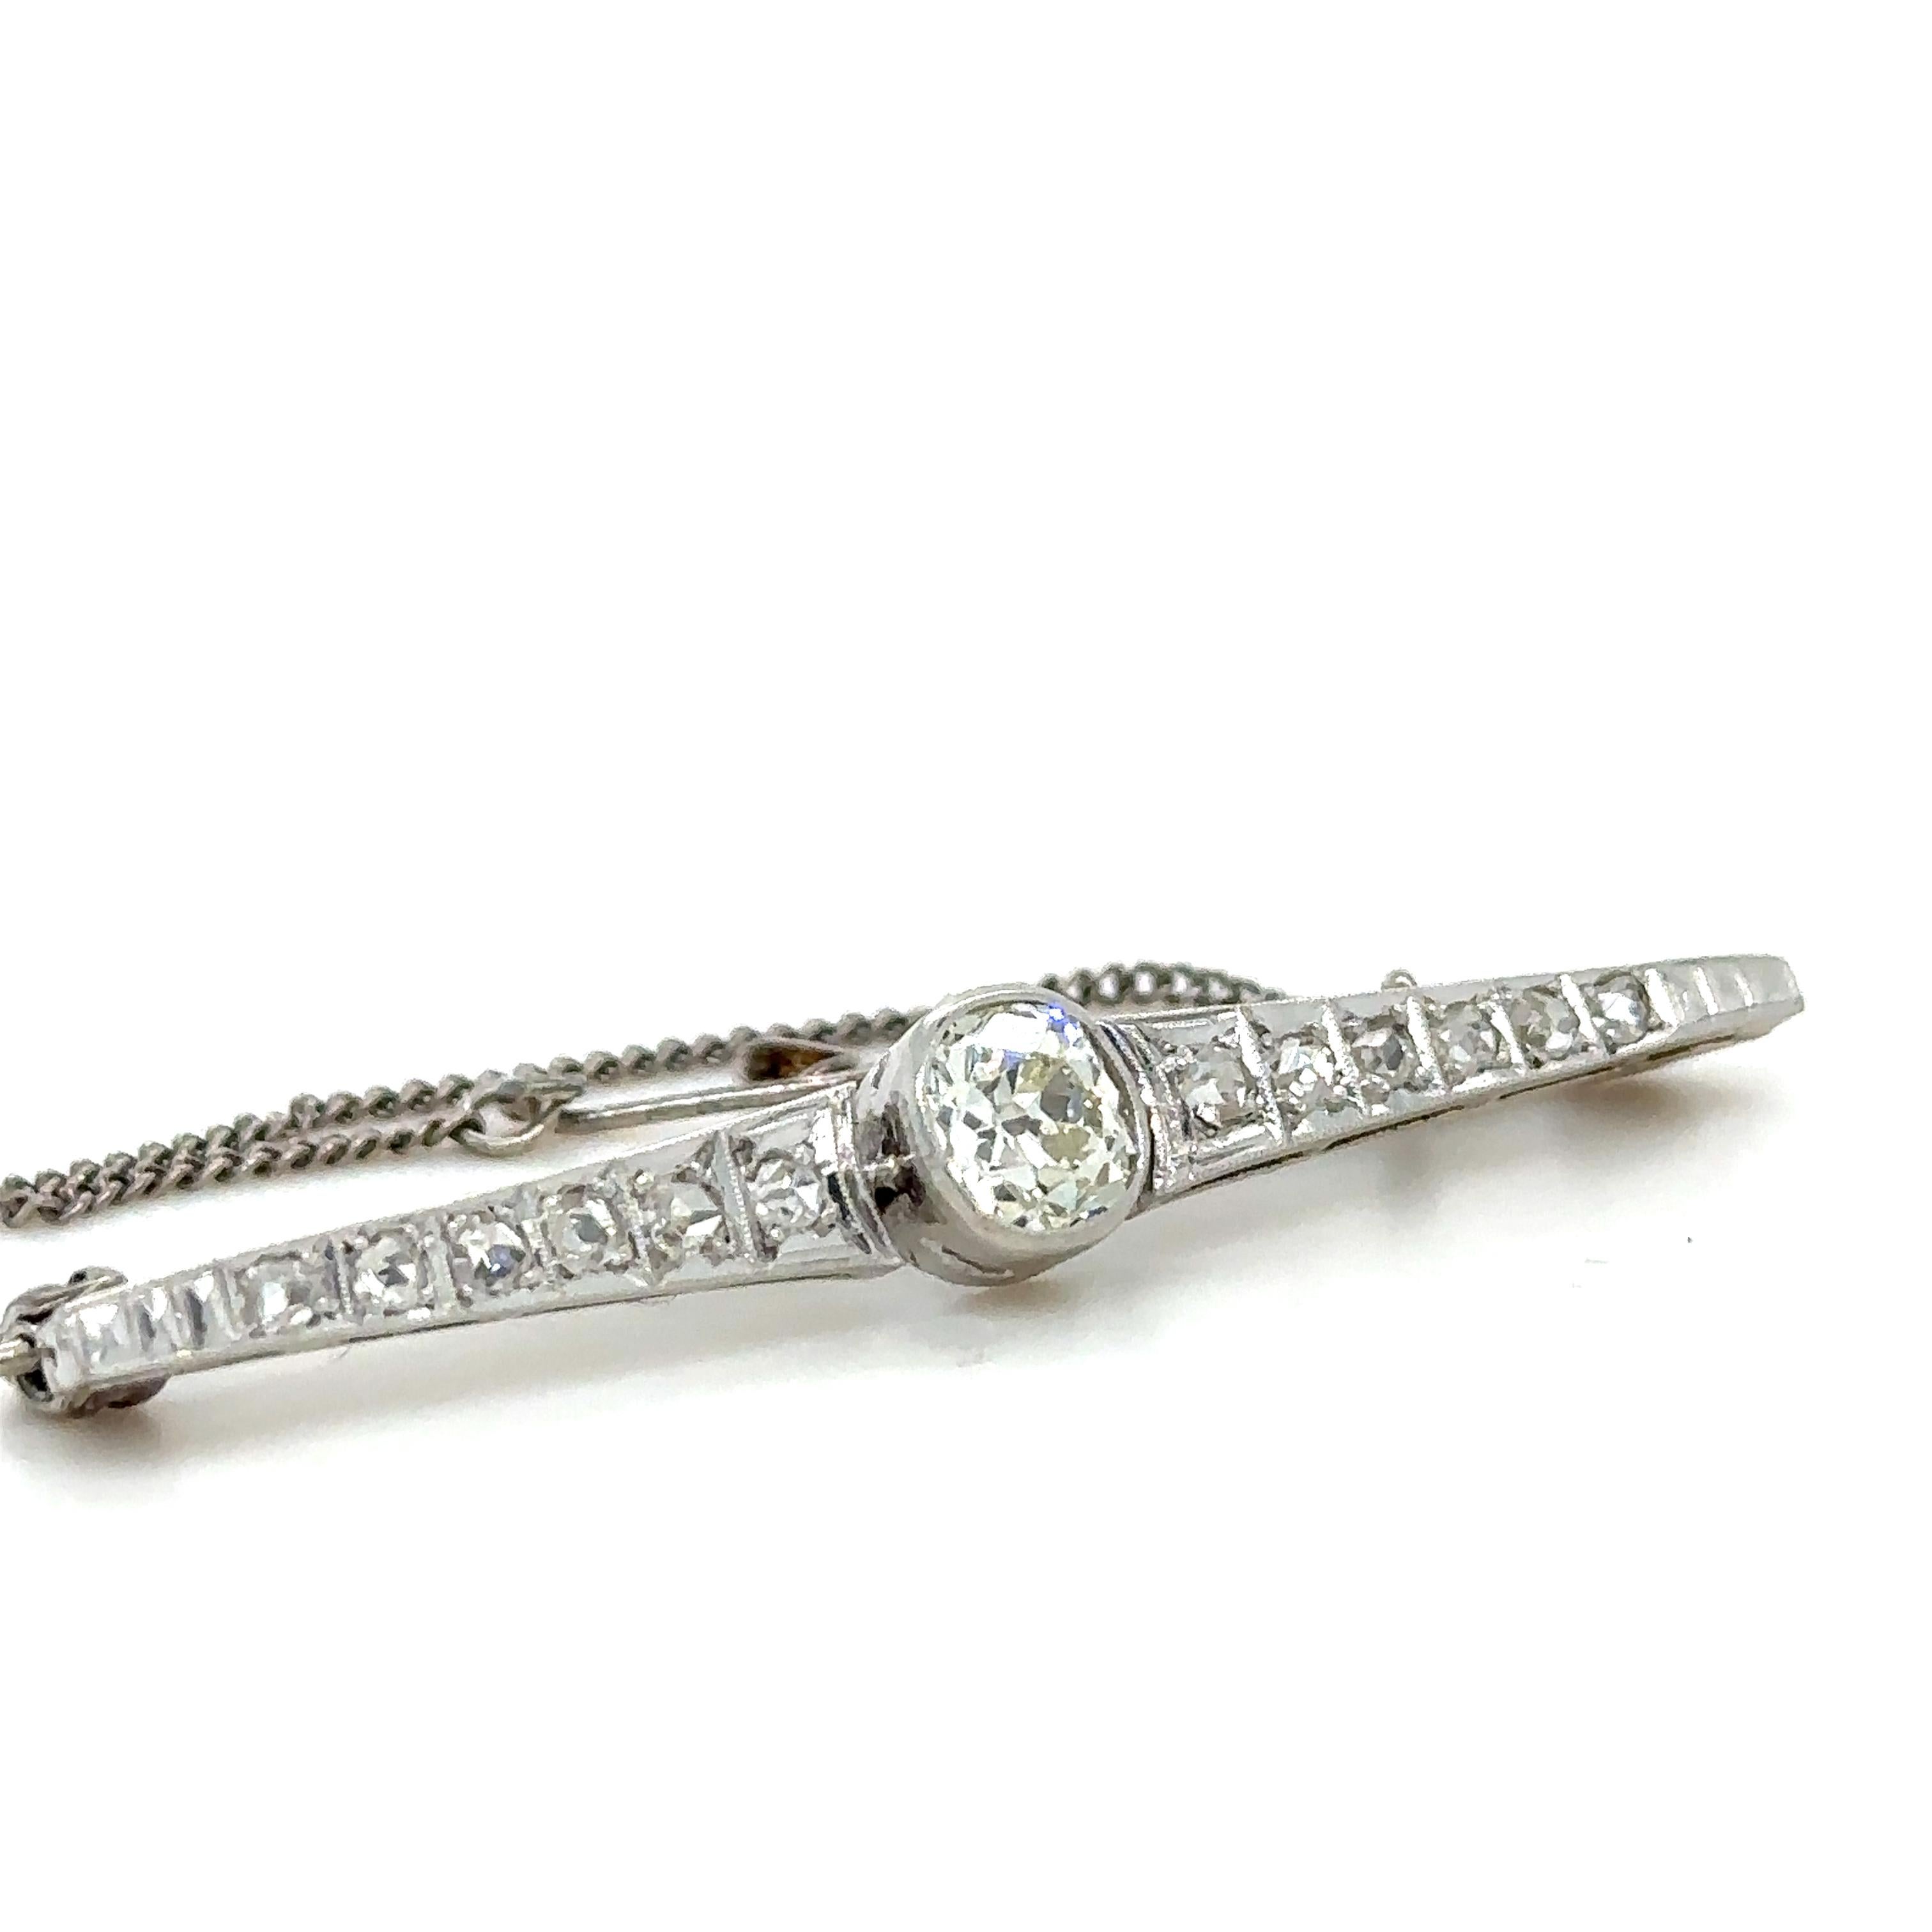 An Old Cut Diamond Bar Brooch, bezel set in platinum on 18ct white gold with 12 rose cut diamonds along the bar. Centre diamond 0.95ct (estimated), Graded in setting as Colour: J, Clarity: VS2

Rose cut diamonds 1.7mm

Circa 1920

Metal: Platinum &